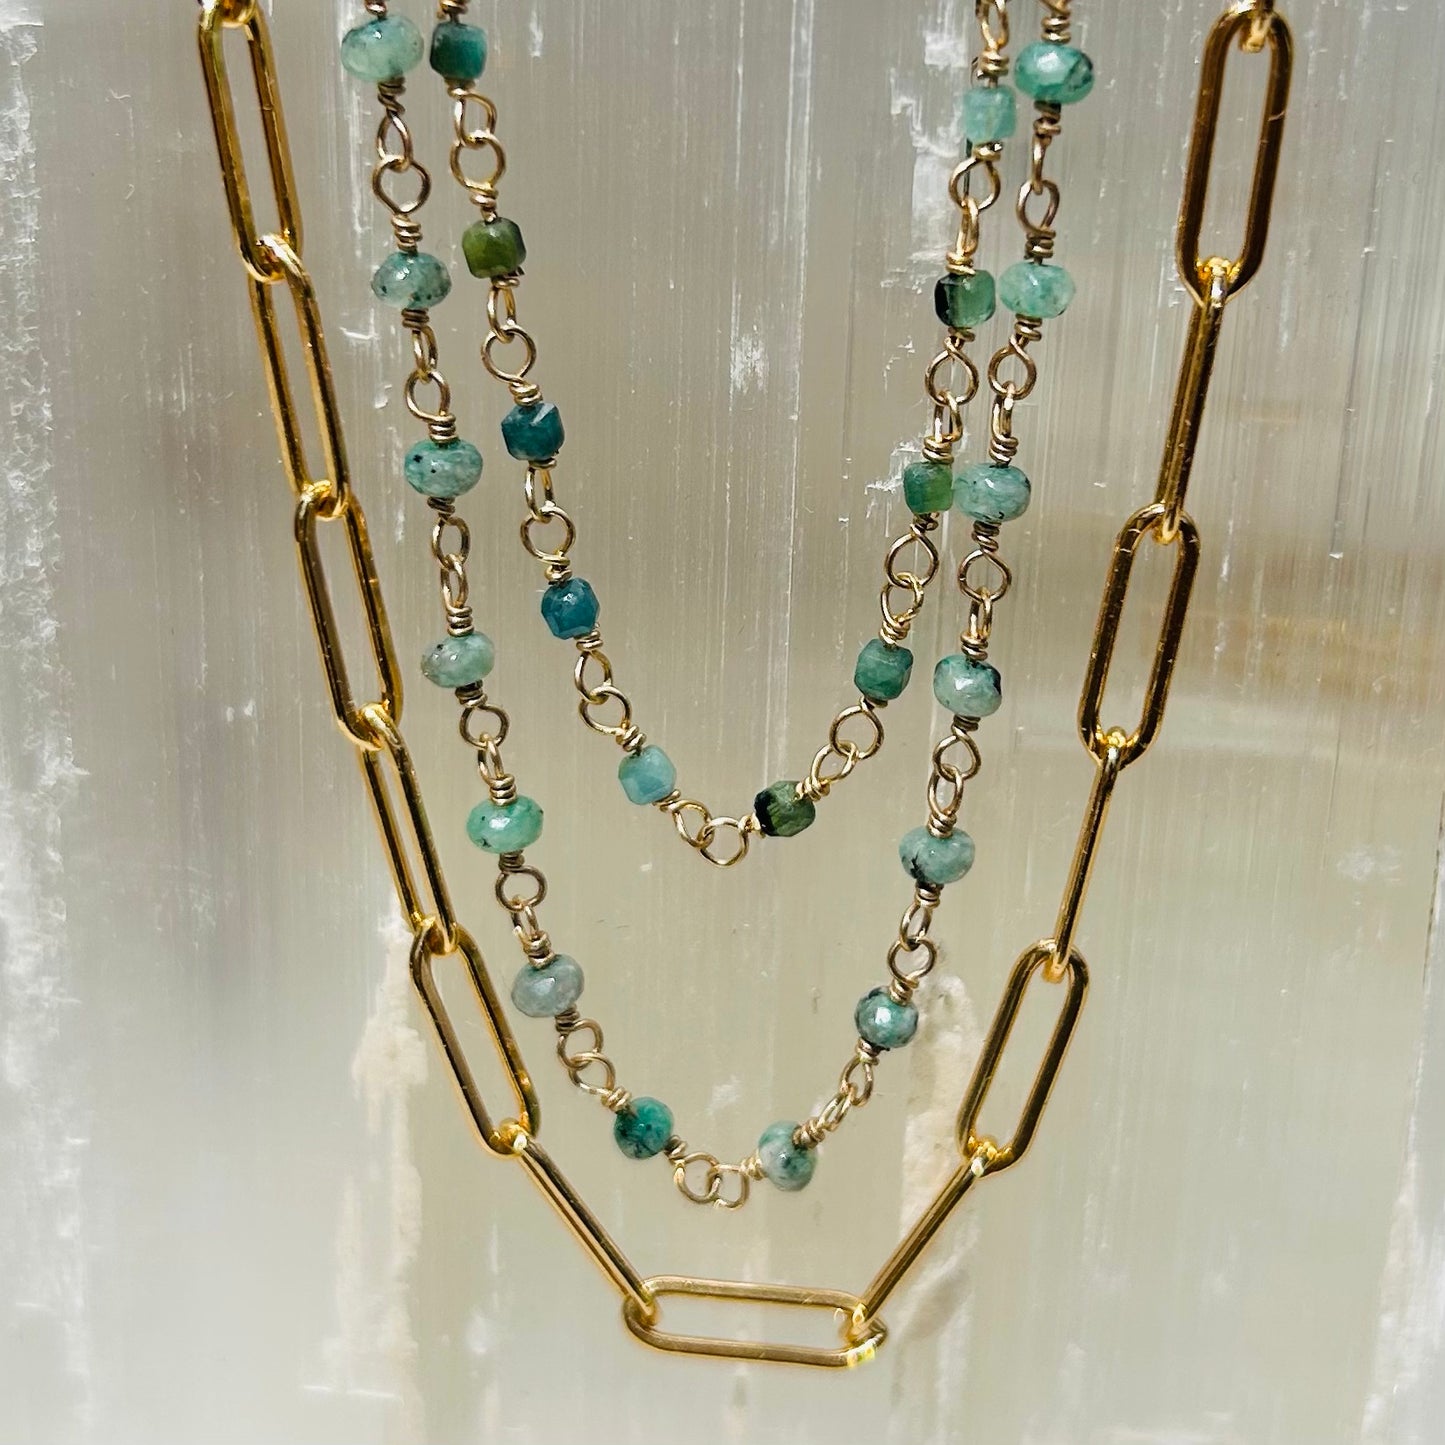 Gemstone Rosary Necklace ~ Small Green Emerald